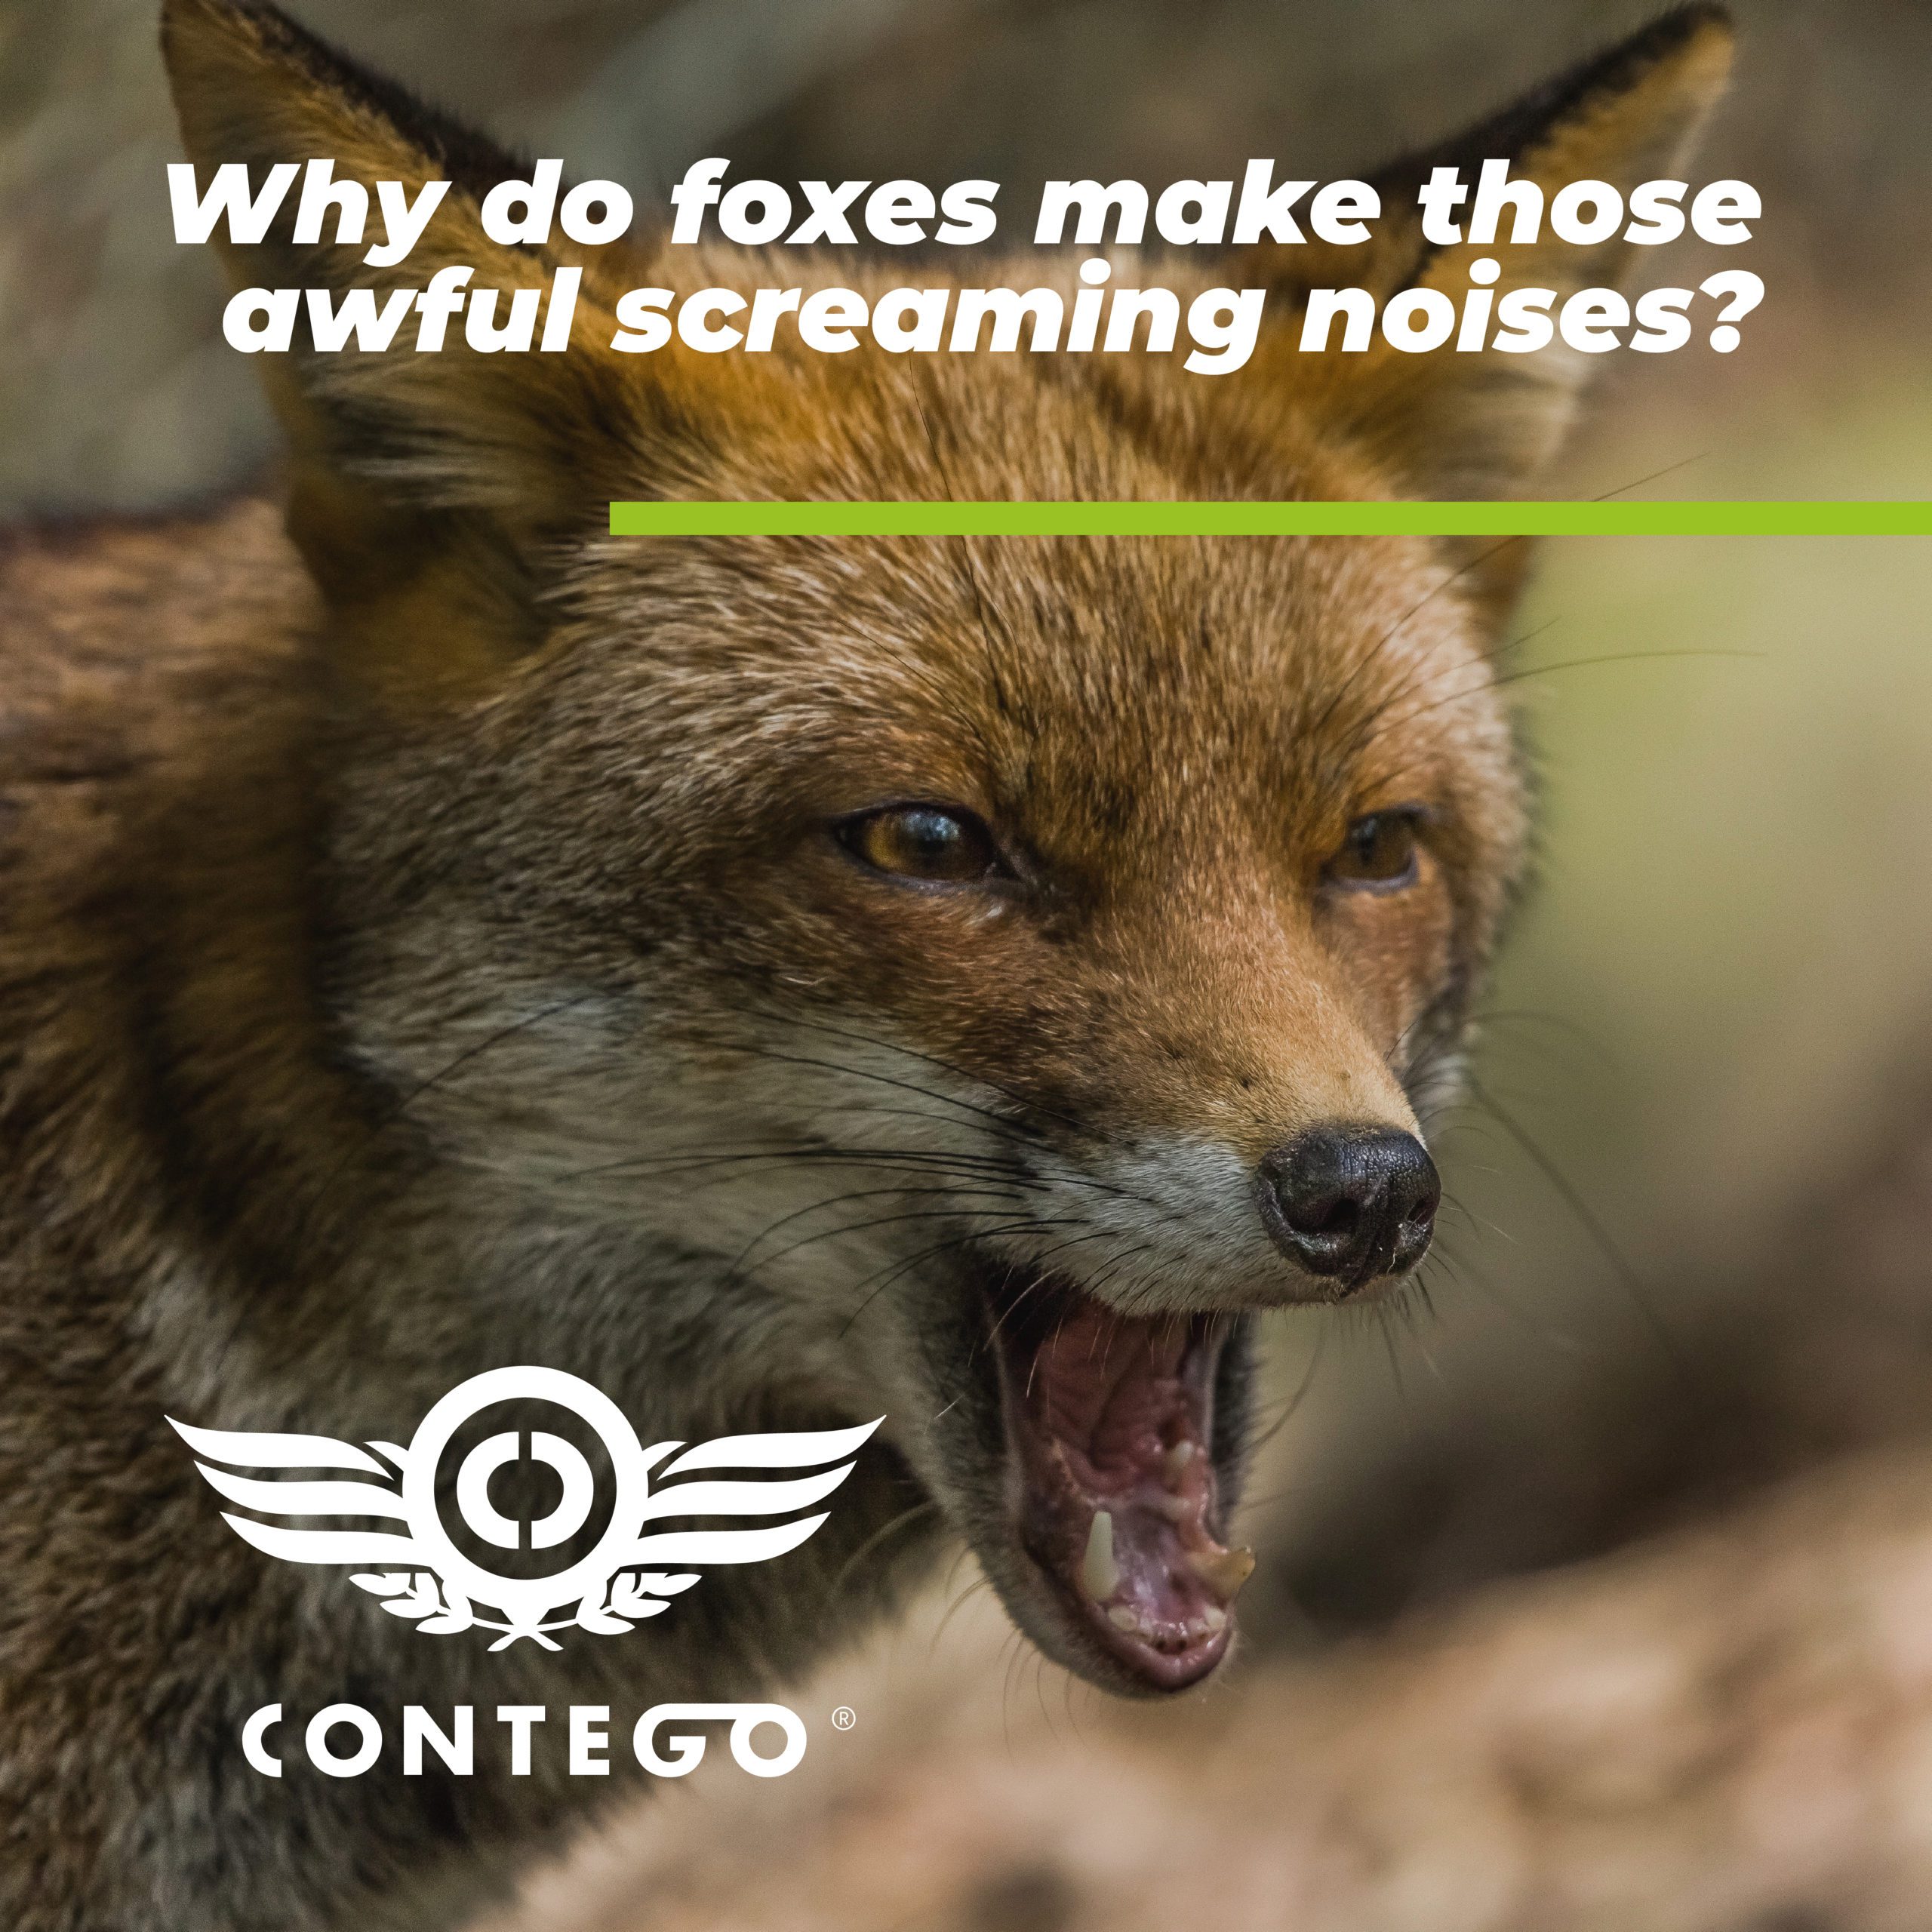 Why Do Foxes Make Those Awful Screaming Noises? | Contego Response